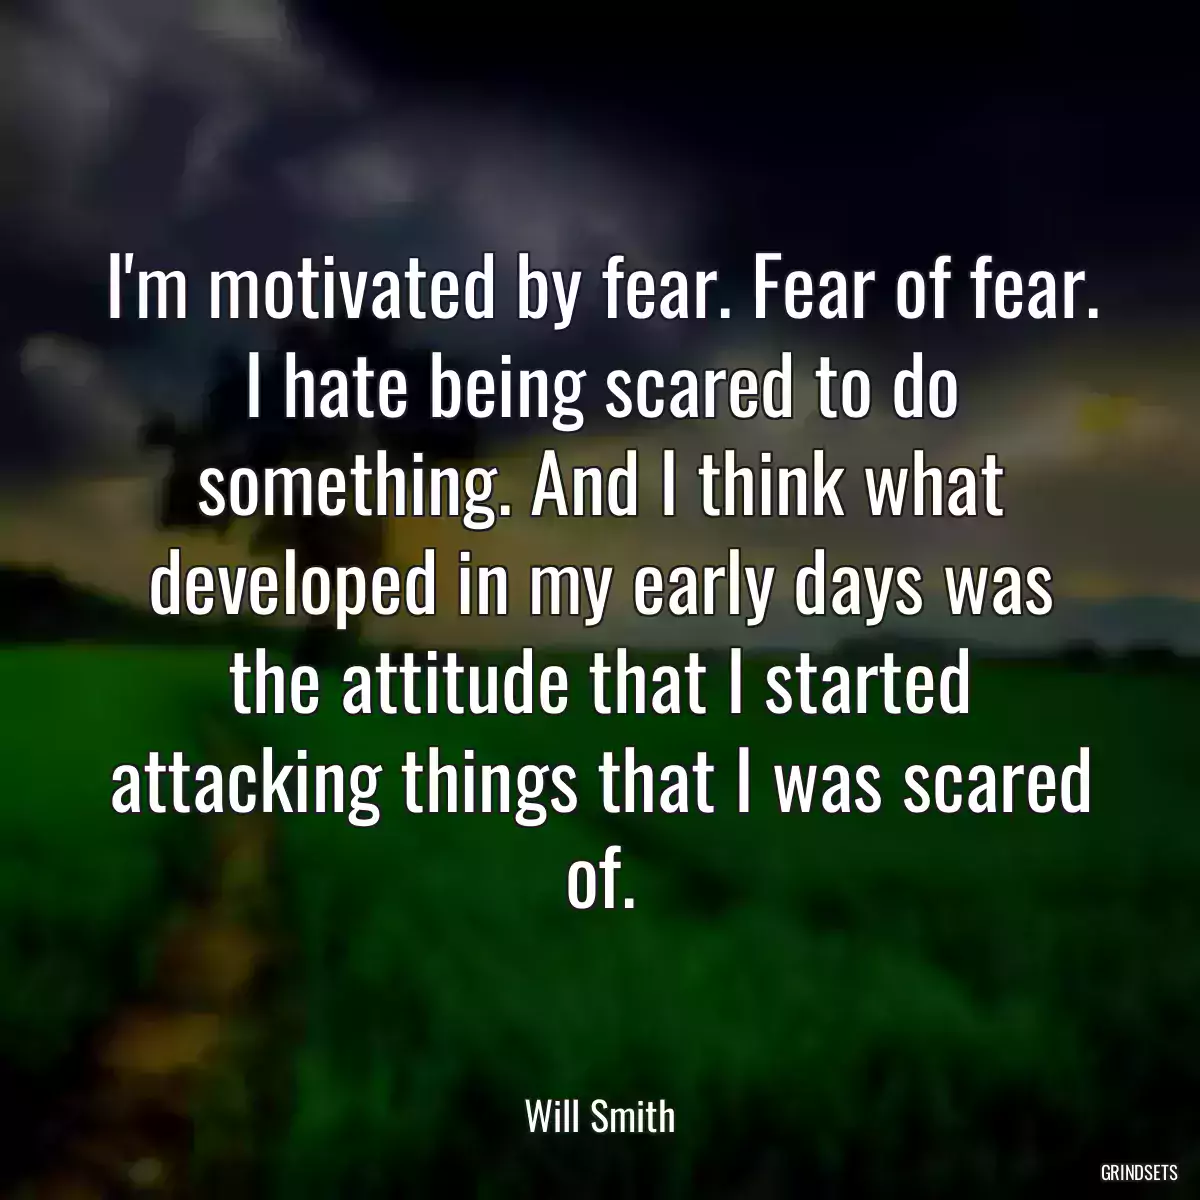 I\'m motivated by fear. Fear of fear. I hate being scared to do something. And I think what developed in my early days was the attitude that I started attacking things that I was scared of.